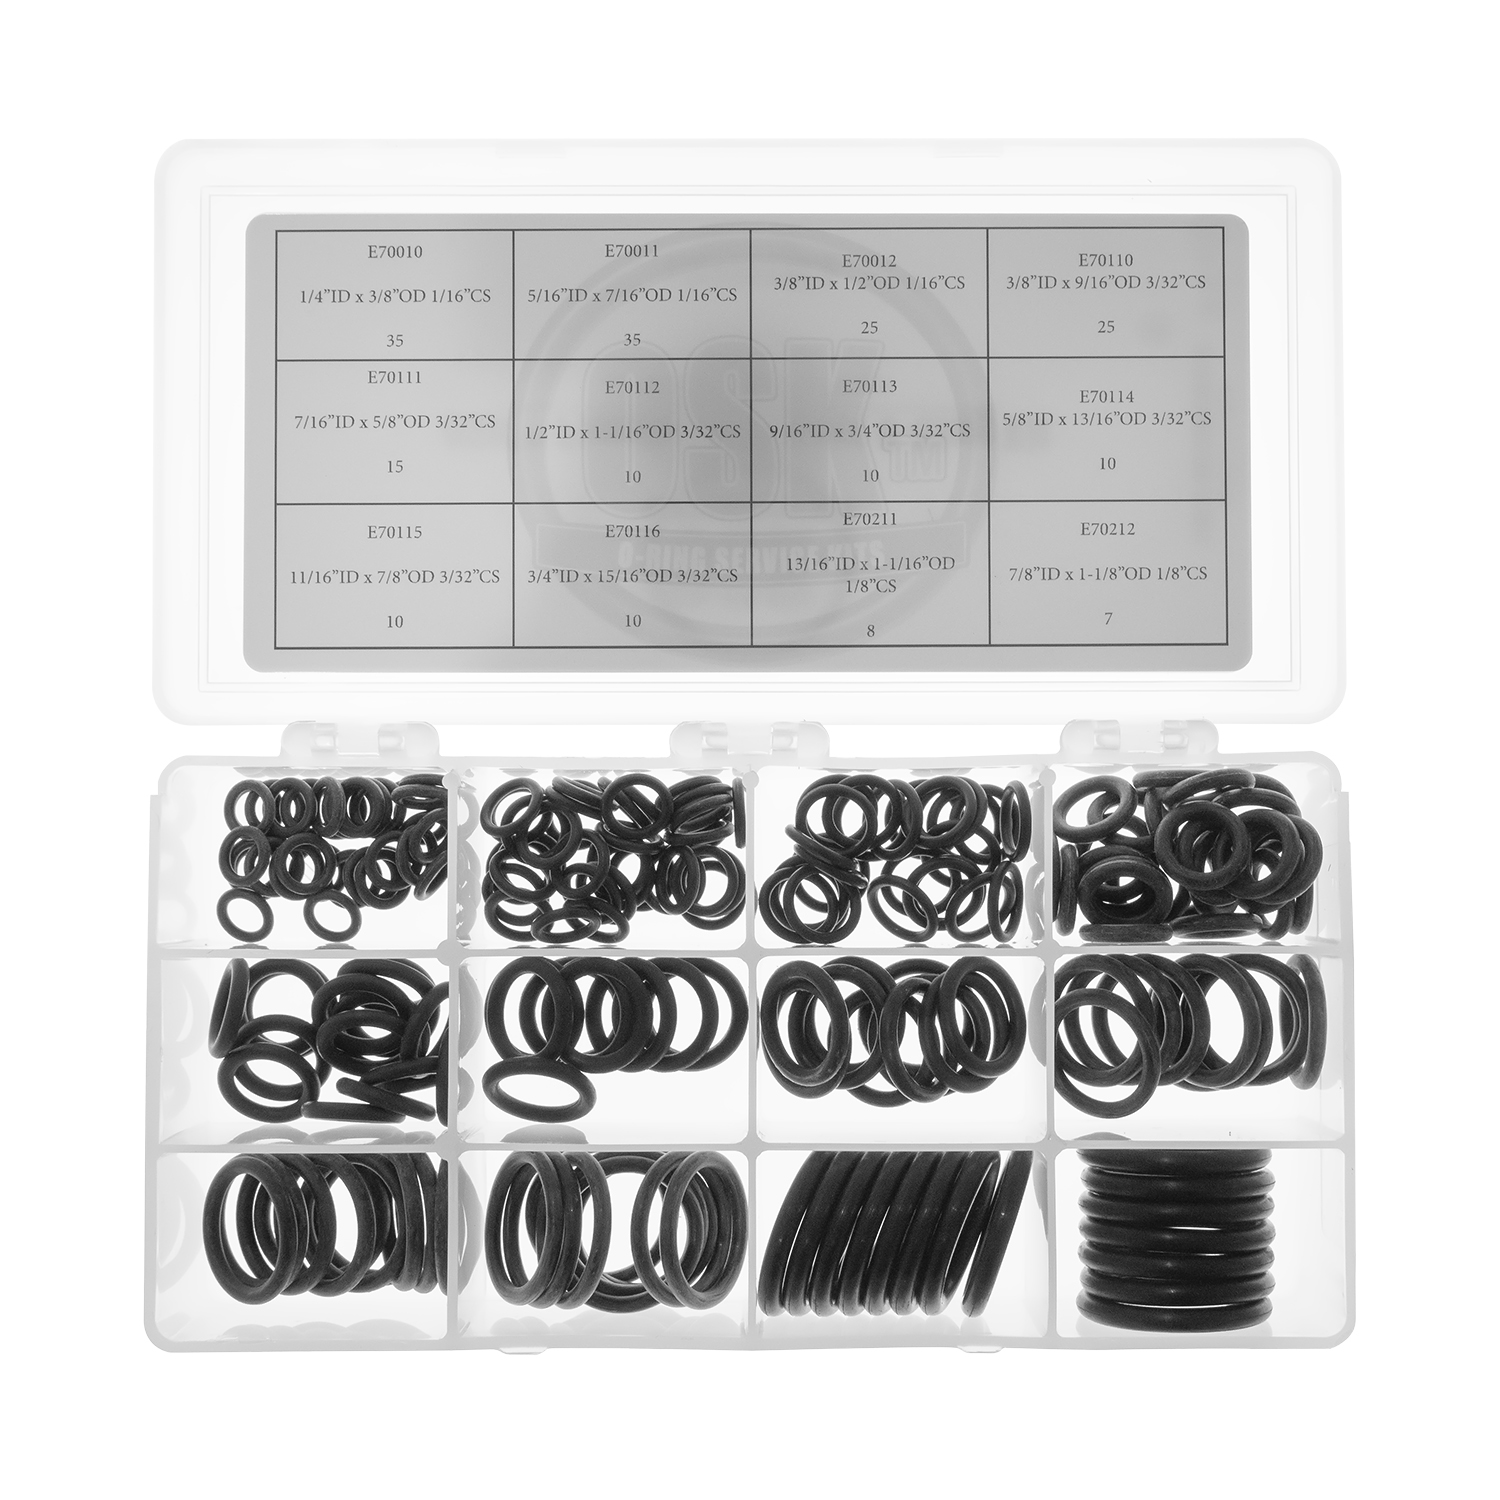 DANCO 200-Piece O-Ring Kit 34443 - The Home Depot